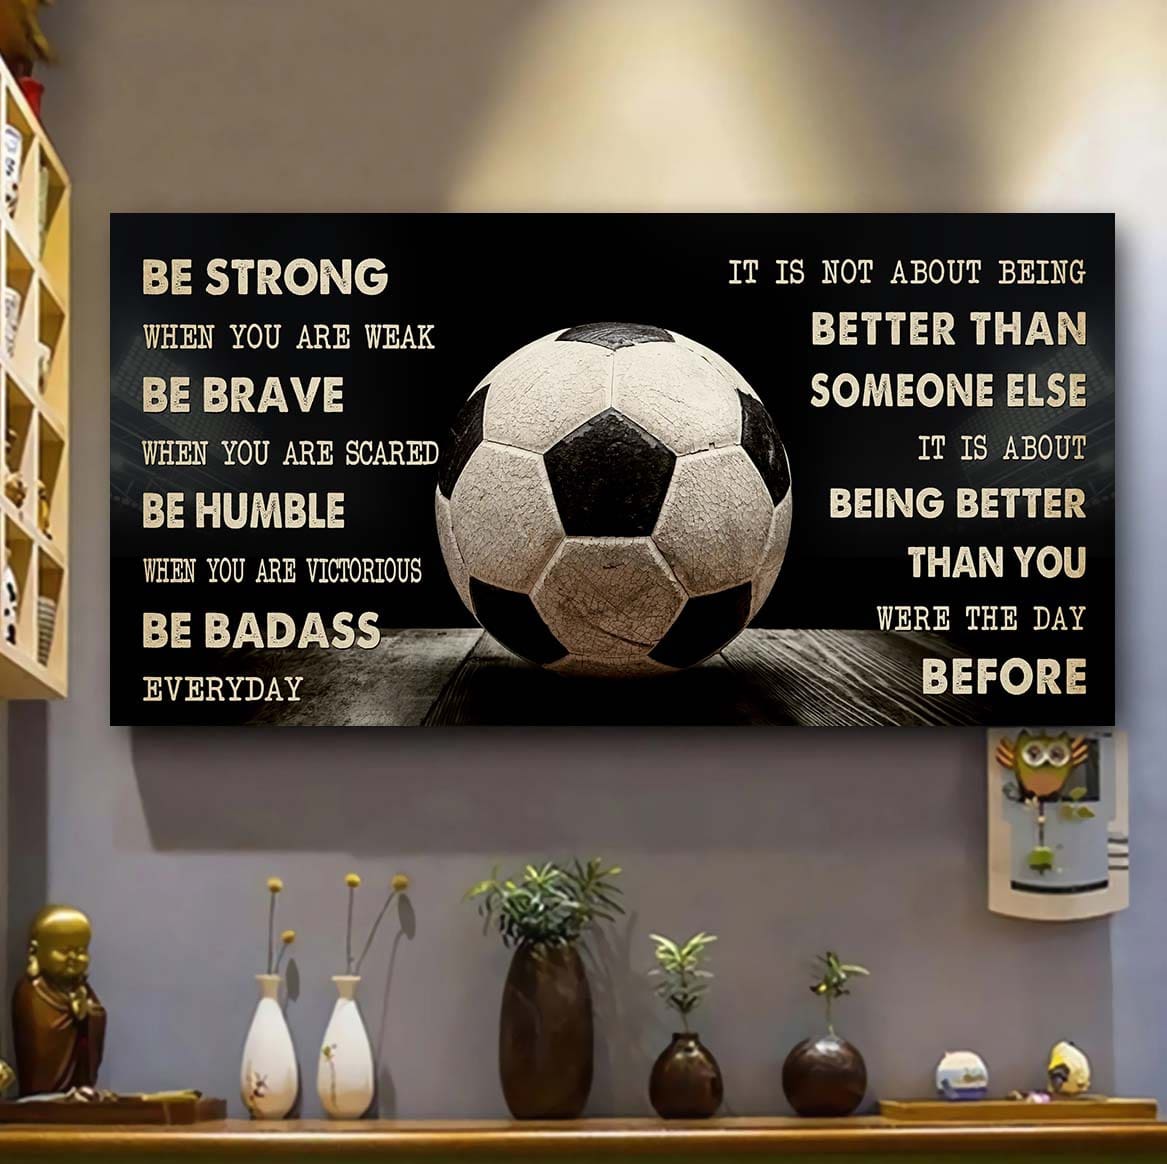 American Football canvas It Is Not About Being Better Than Someone Else - Be Strong When You Are Weak